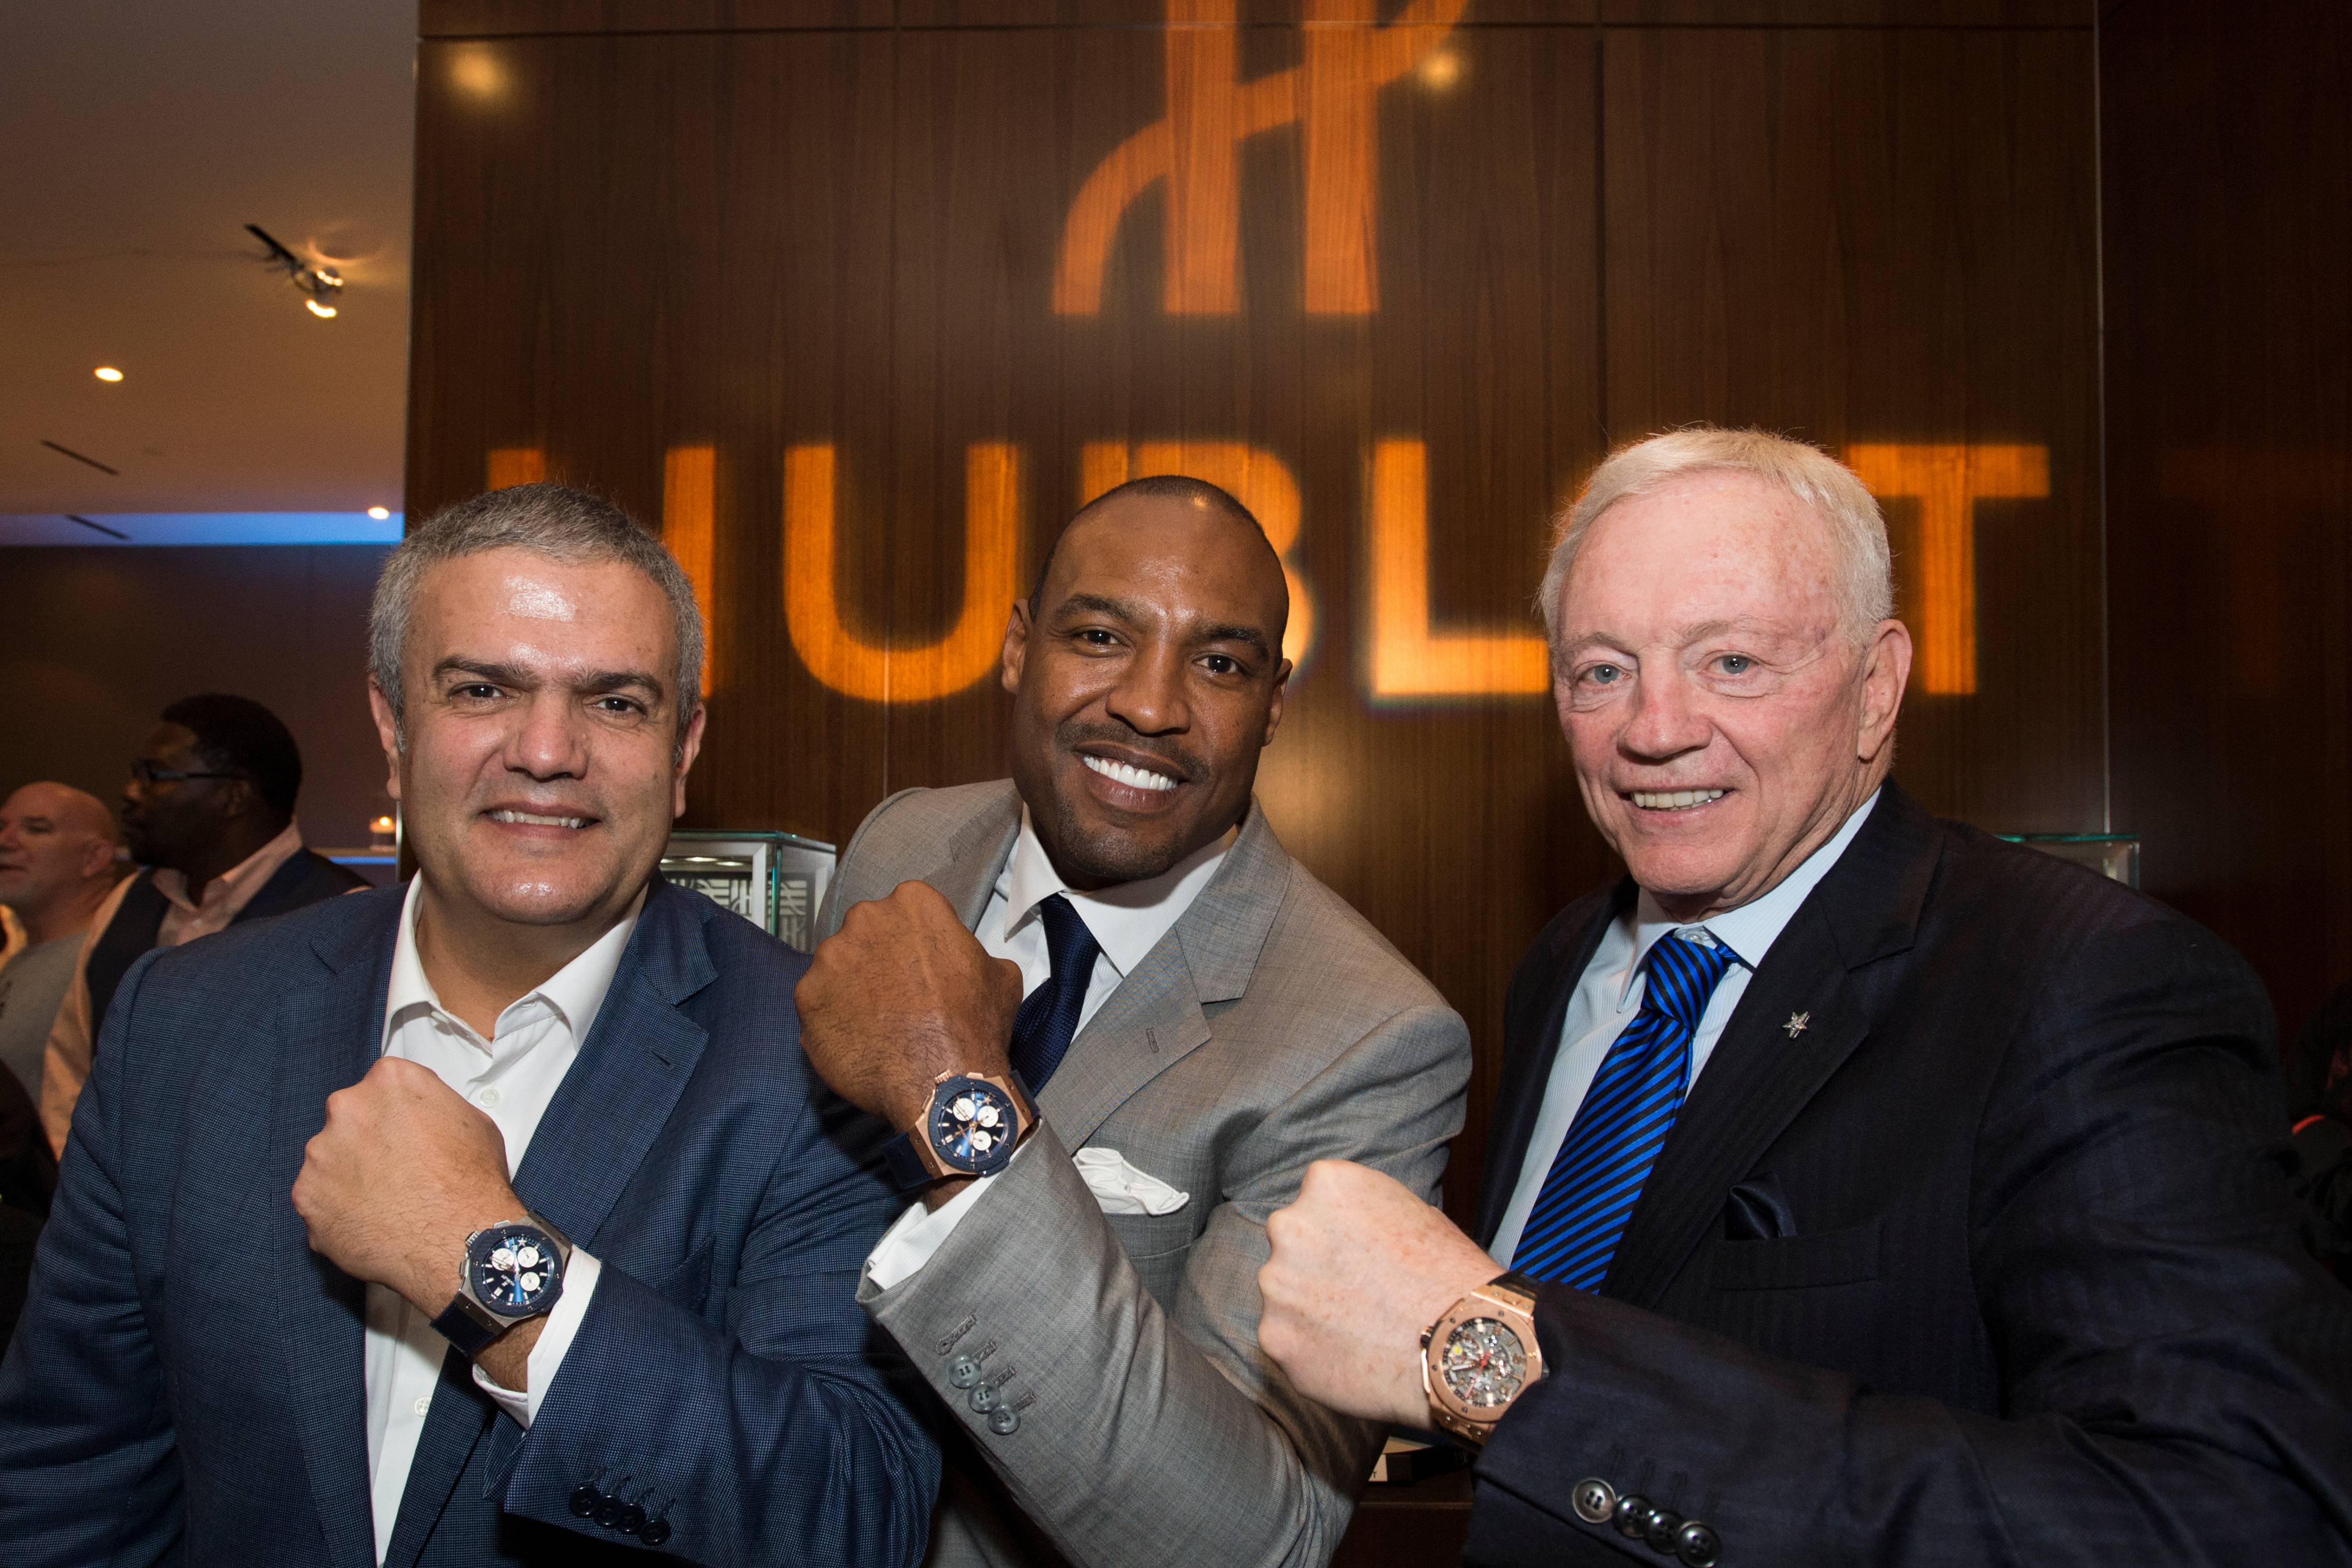 Hublot Launches Latest Timepiece With The Dallas Cowboys